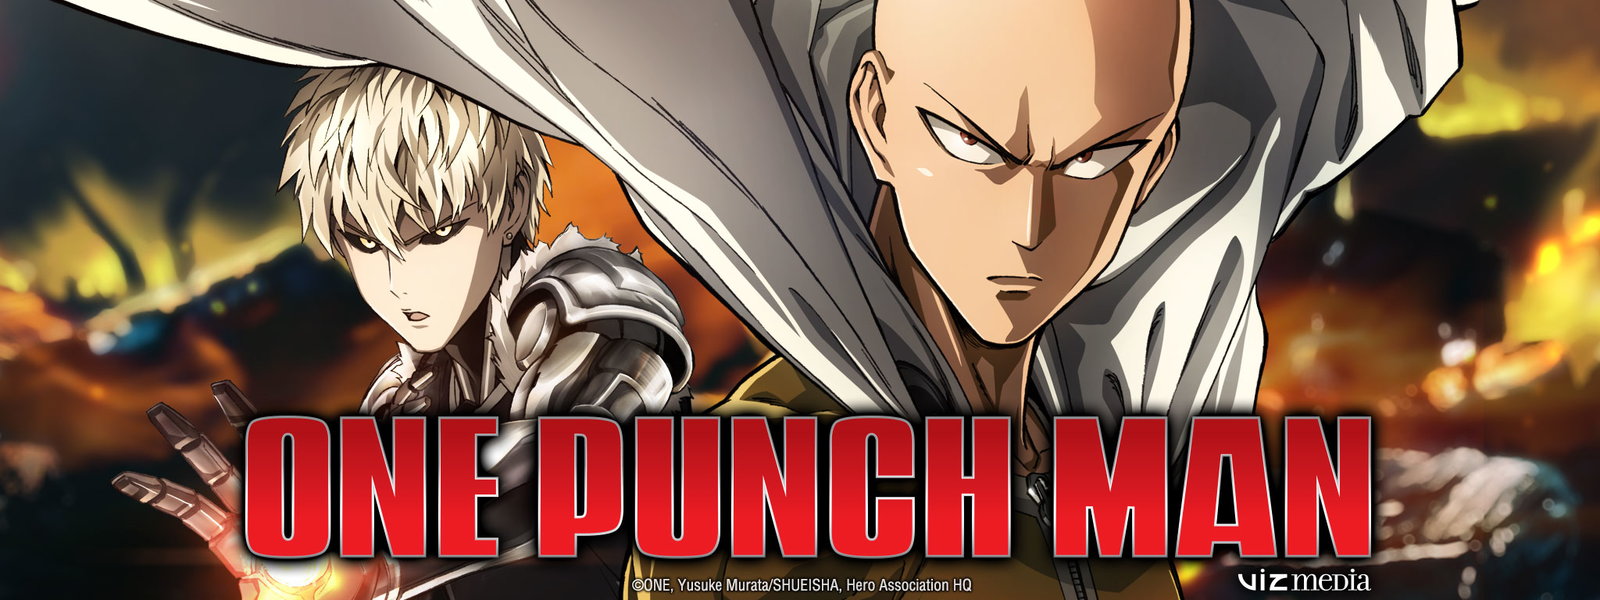 One Punch Man anime review